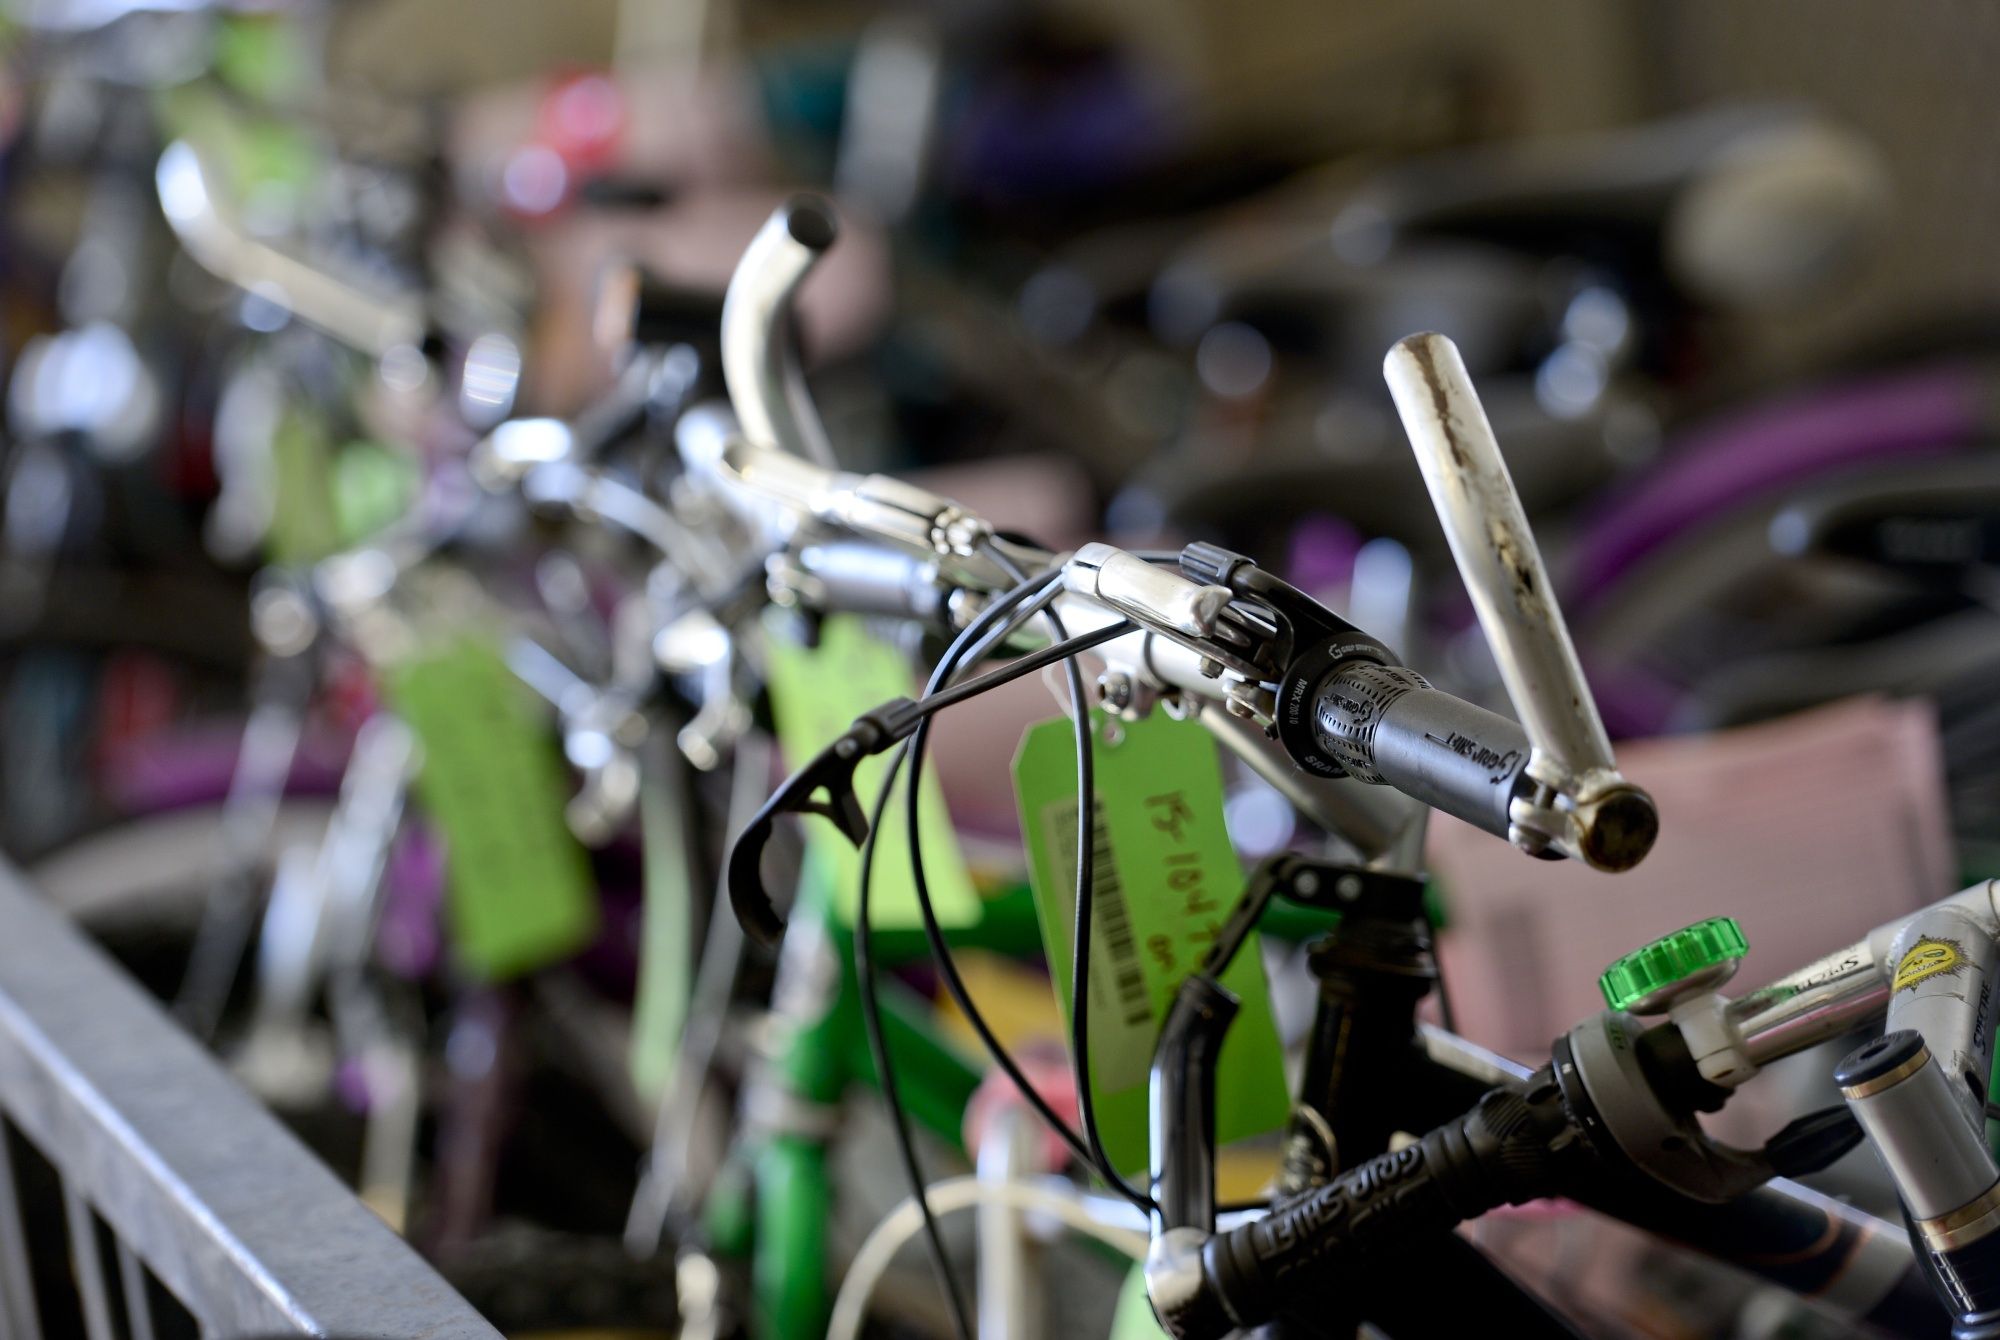 Confiscated bicycles picked up by police in Colorado. While local bike registration laws are promoted as a safety measure, critics warn they are not enforced equitably.&nbsp;